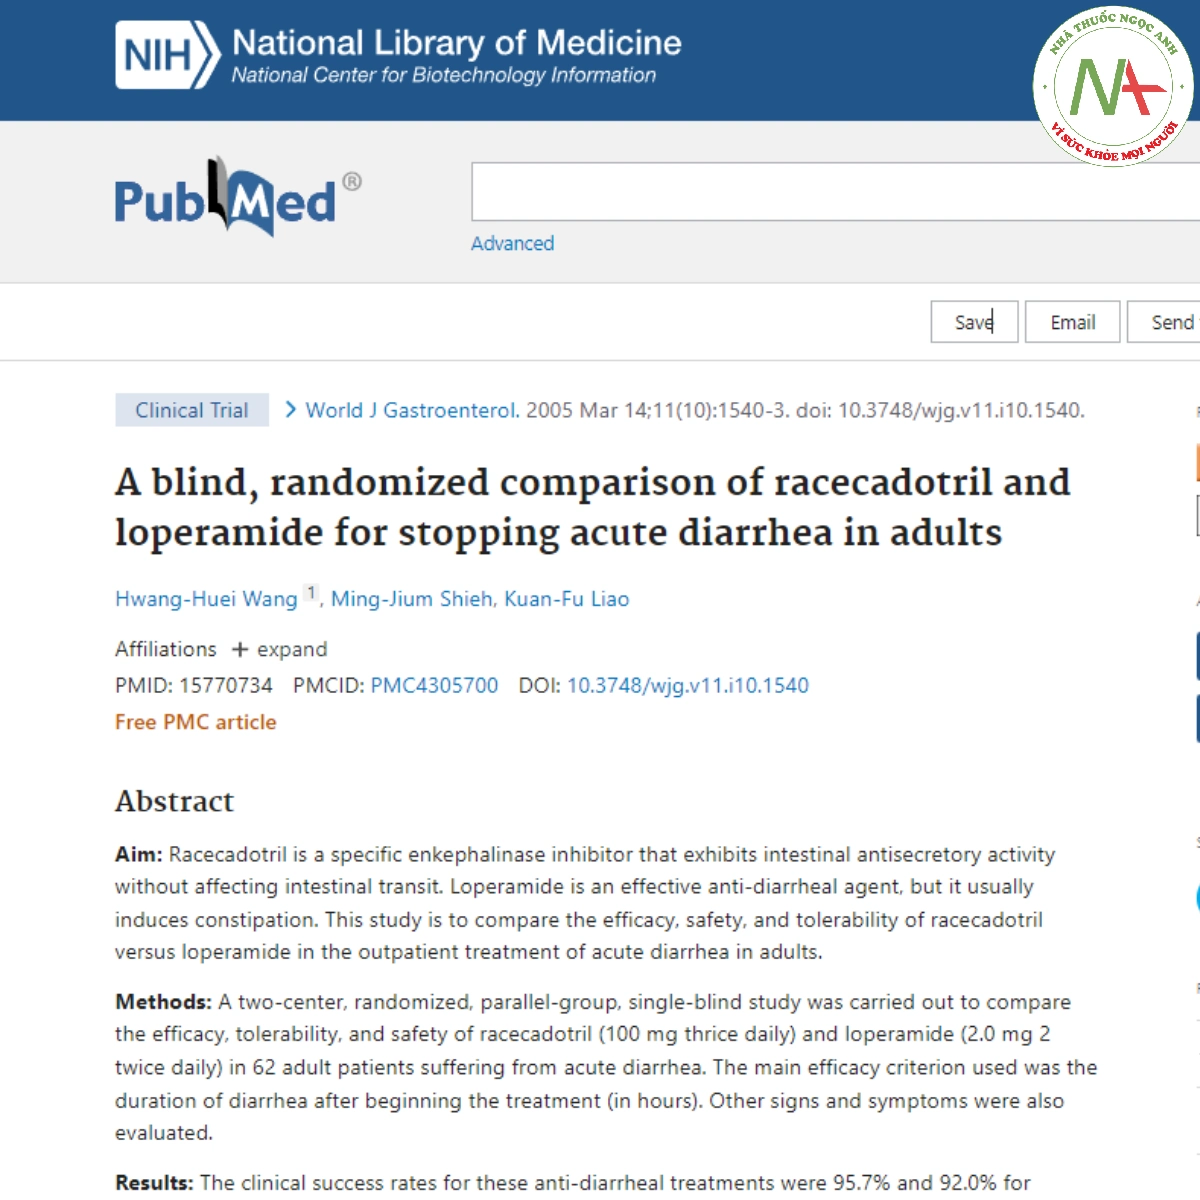 A blind, randomized comparison of racecadotril and loperamide for stopping acute diarrhea in adults